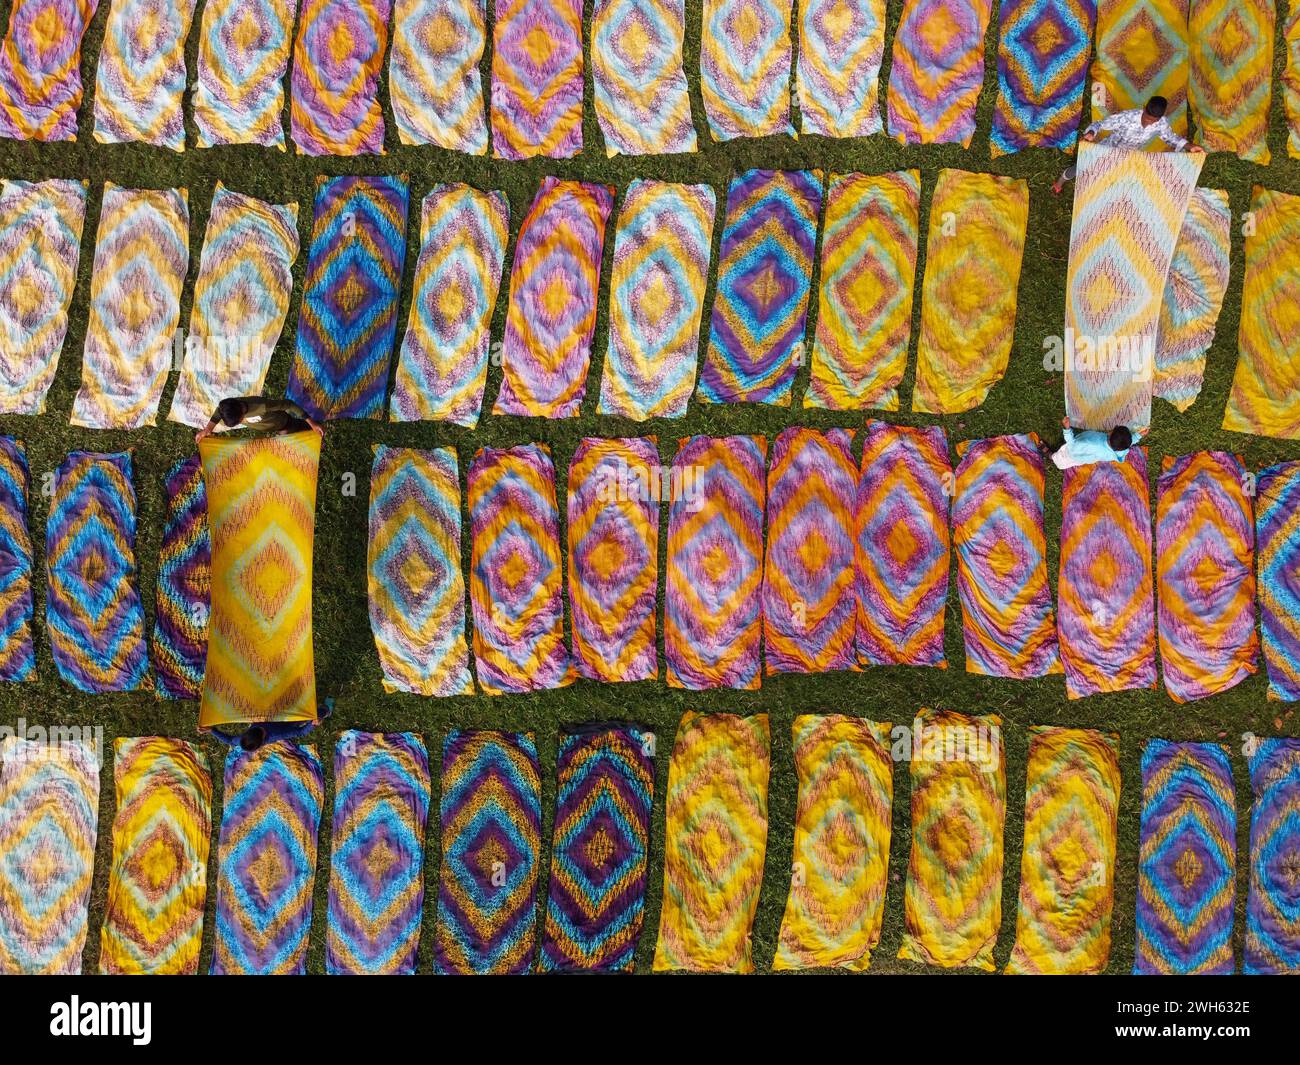 Narayanganj, Dhaka, Bangladesh. 8th Feb, 2024. Hundreds of pieces of dyed cloth are spread out across a field at Batik Village in Narayanganj, Bangladesh for drying - a process that usually takes 4 hours. The dyed fabrics, used in garment factories making T-shirts and women's dresses which sell for less than 3 Â£, are arranged on patches of grass to dry out completely. Once they are dried, they are made into clothes and sold worldwide. Beautifully embellished colorful cloths are created using the Indonesian technique called ''Batik''. Parts of the design are blocked out by applying hot wax Stock Photo